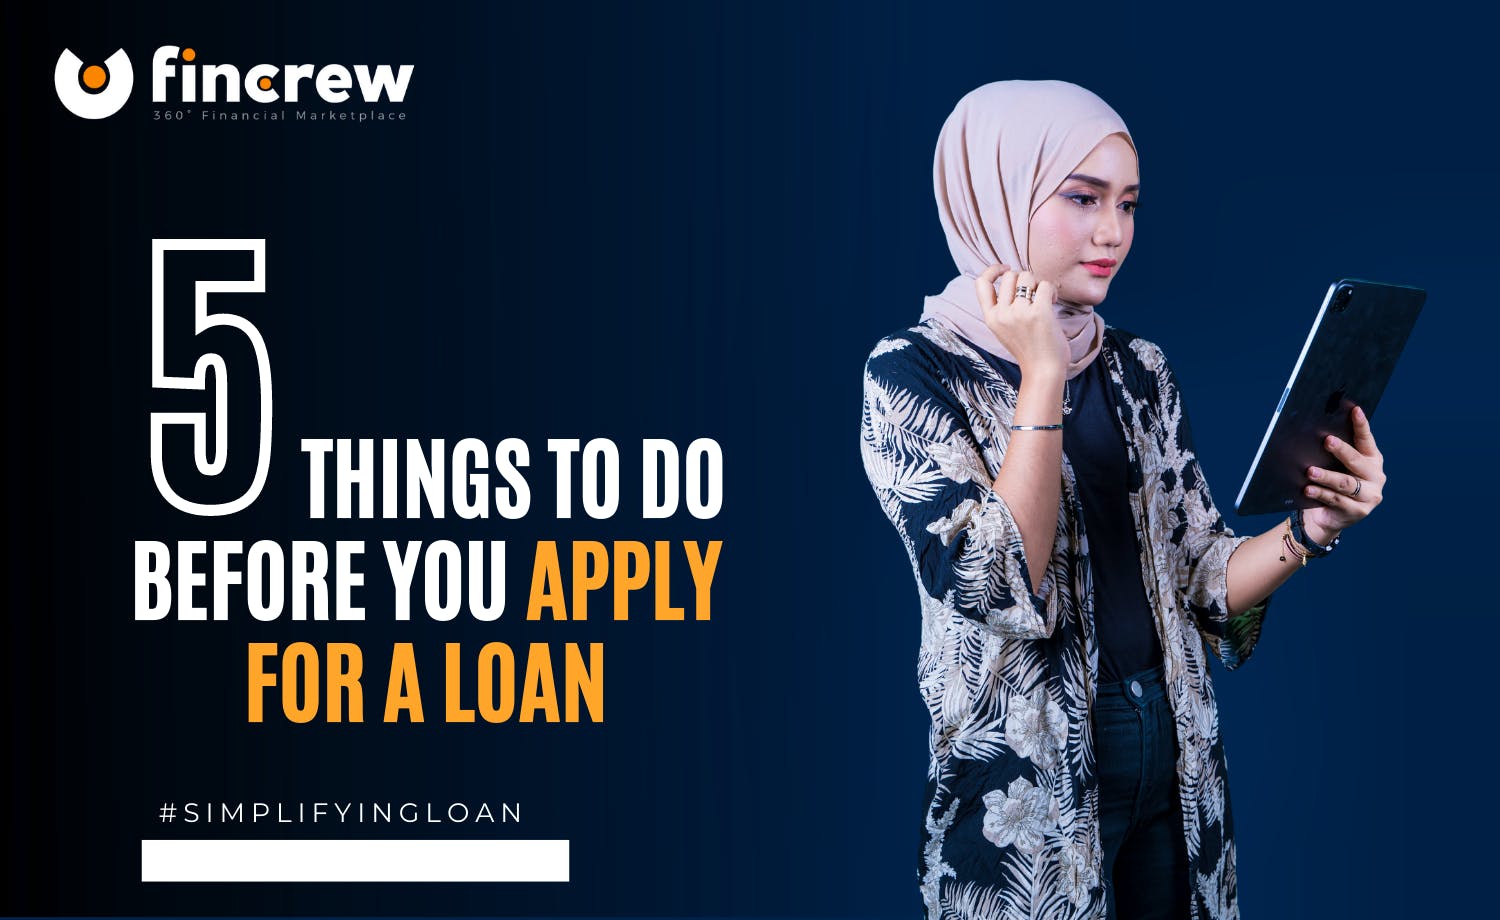 5 Things To Do Before You Apply For a Loan